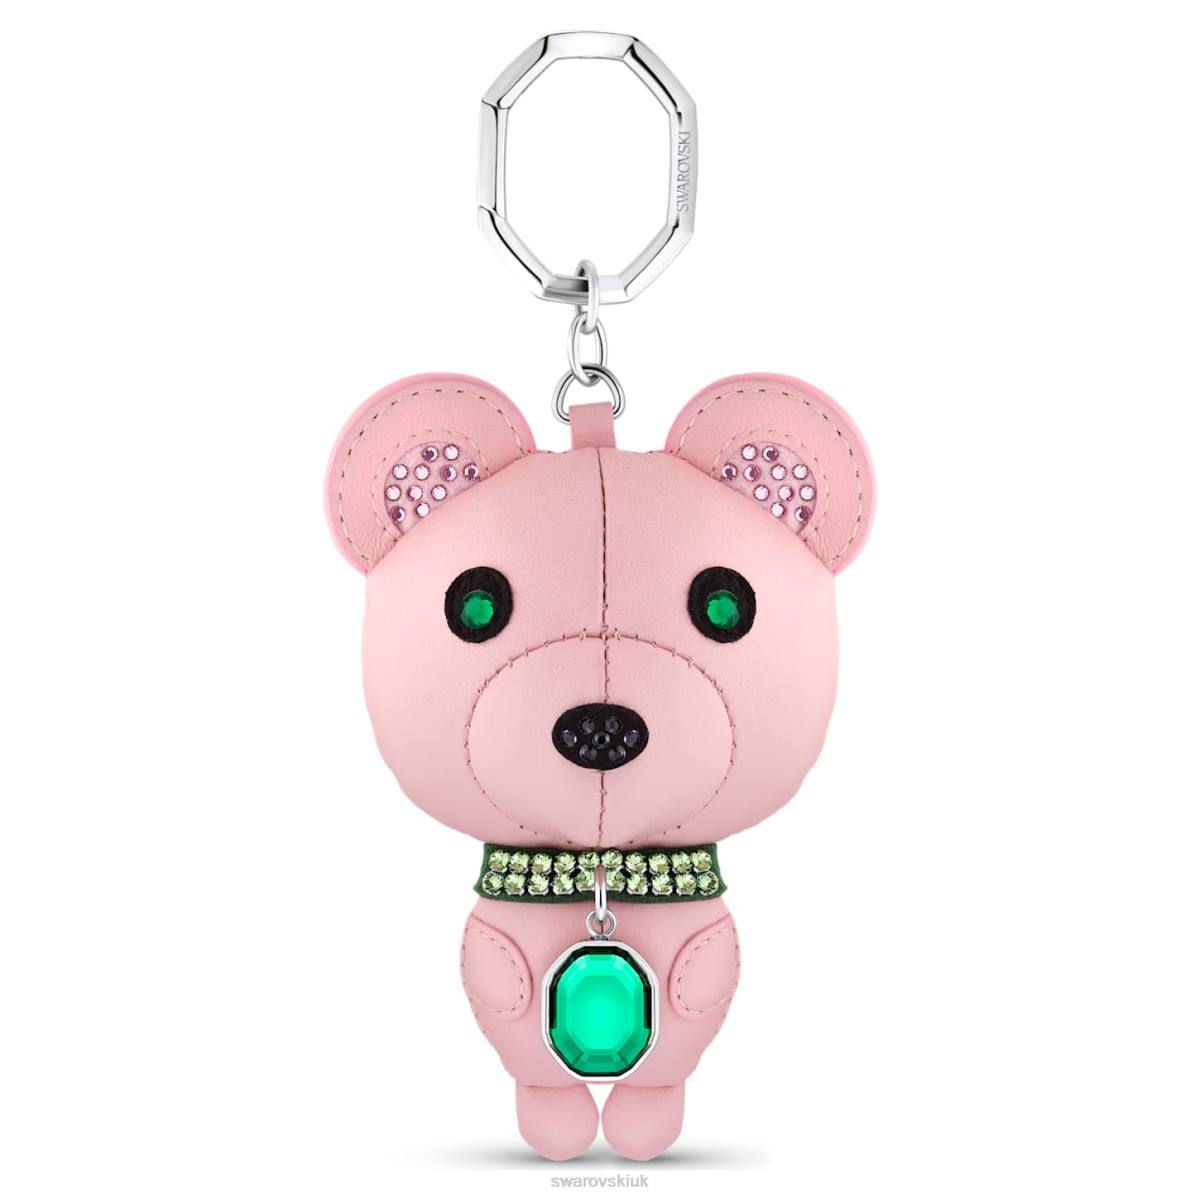 Accessories Swarovski Icons key ring Bear, Multicolored, Stainless steel 48JX1430